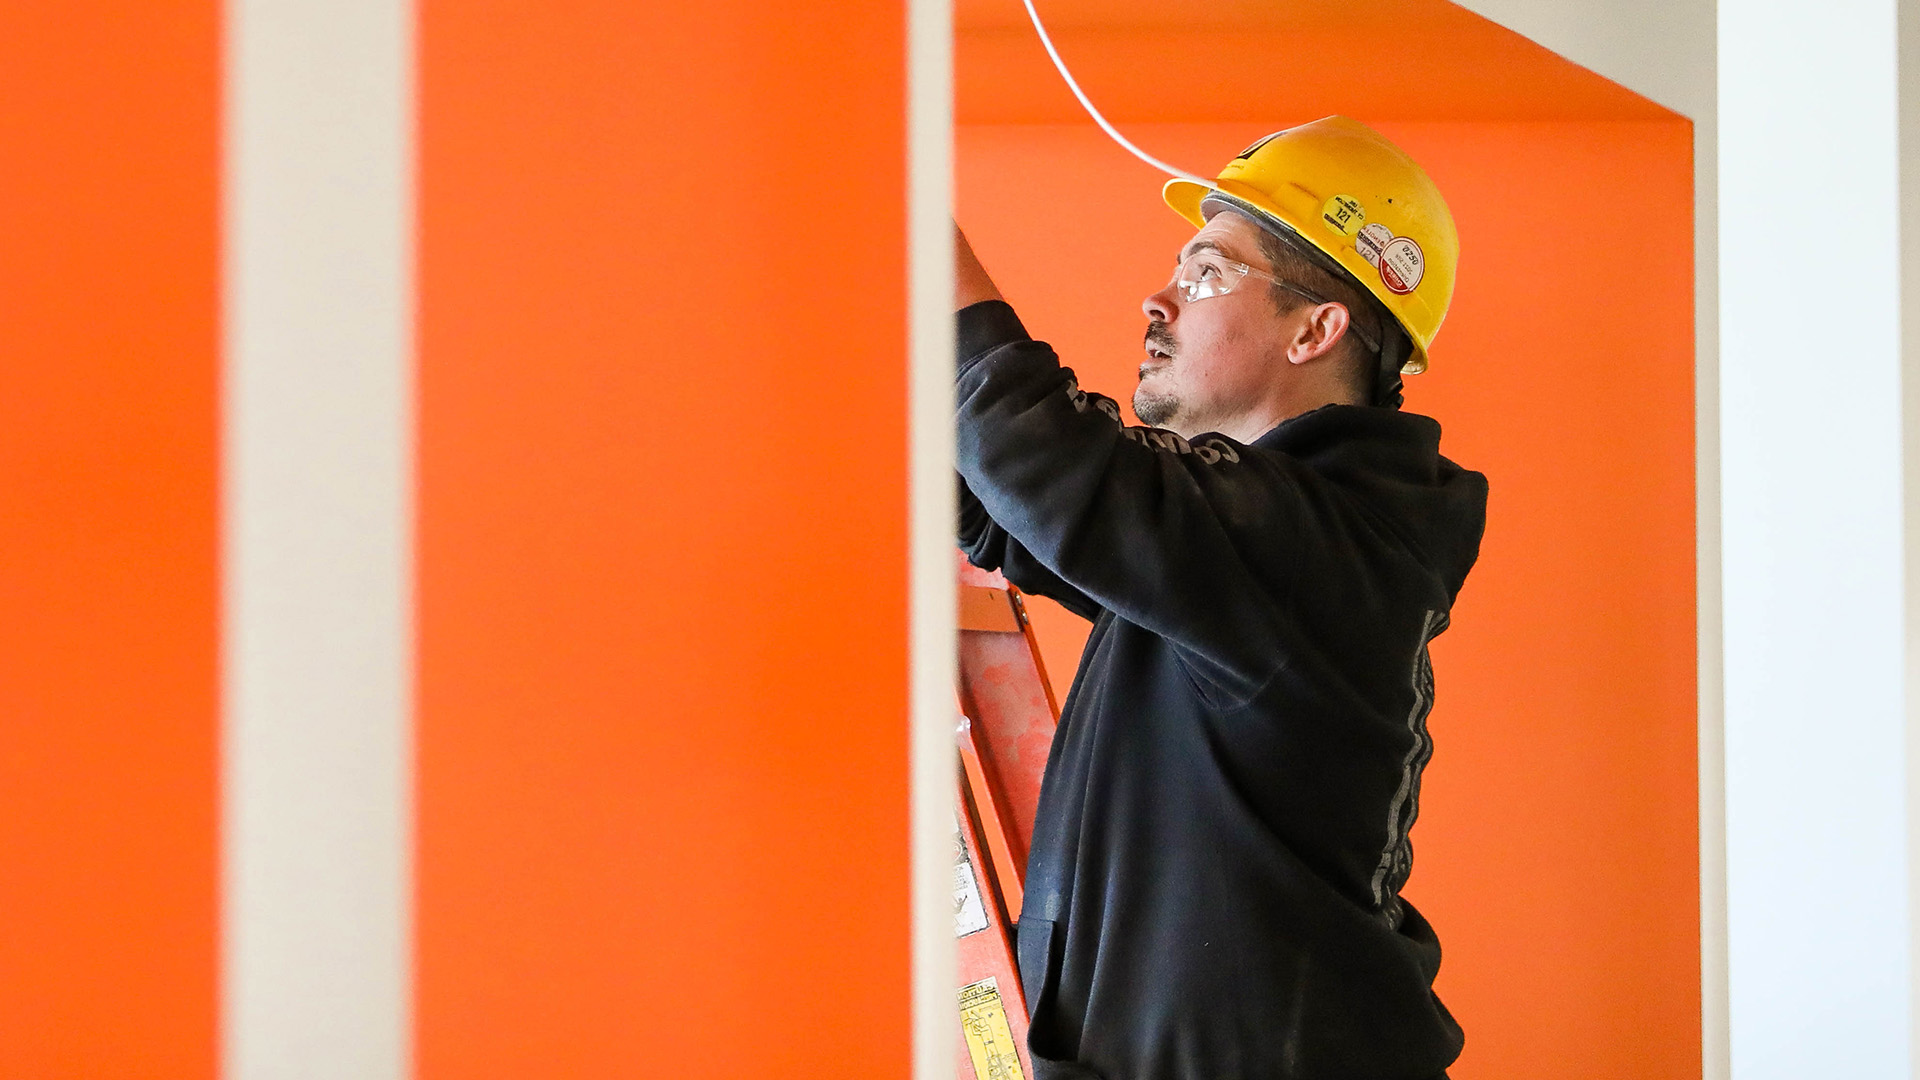 A Commonwealth employee works overhead on Low Voltage work